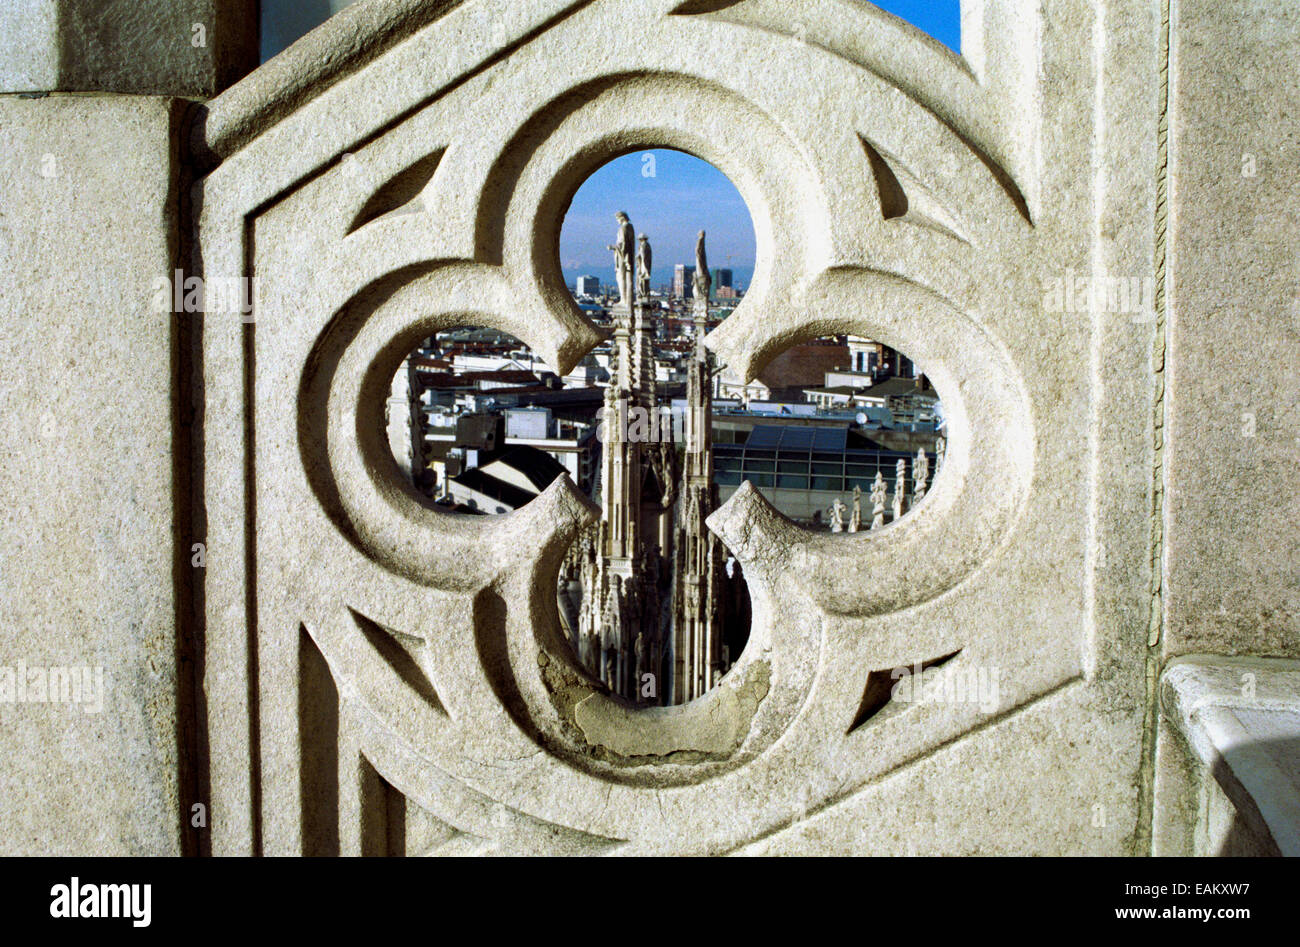 Italy, Lombardy, Milan, the Duomo Roof, Spire Stock Photo